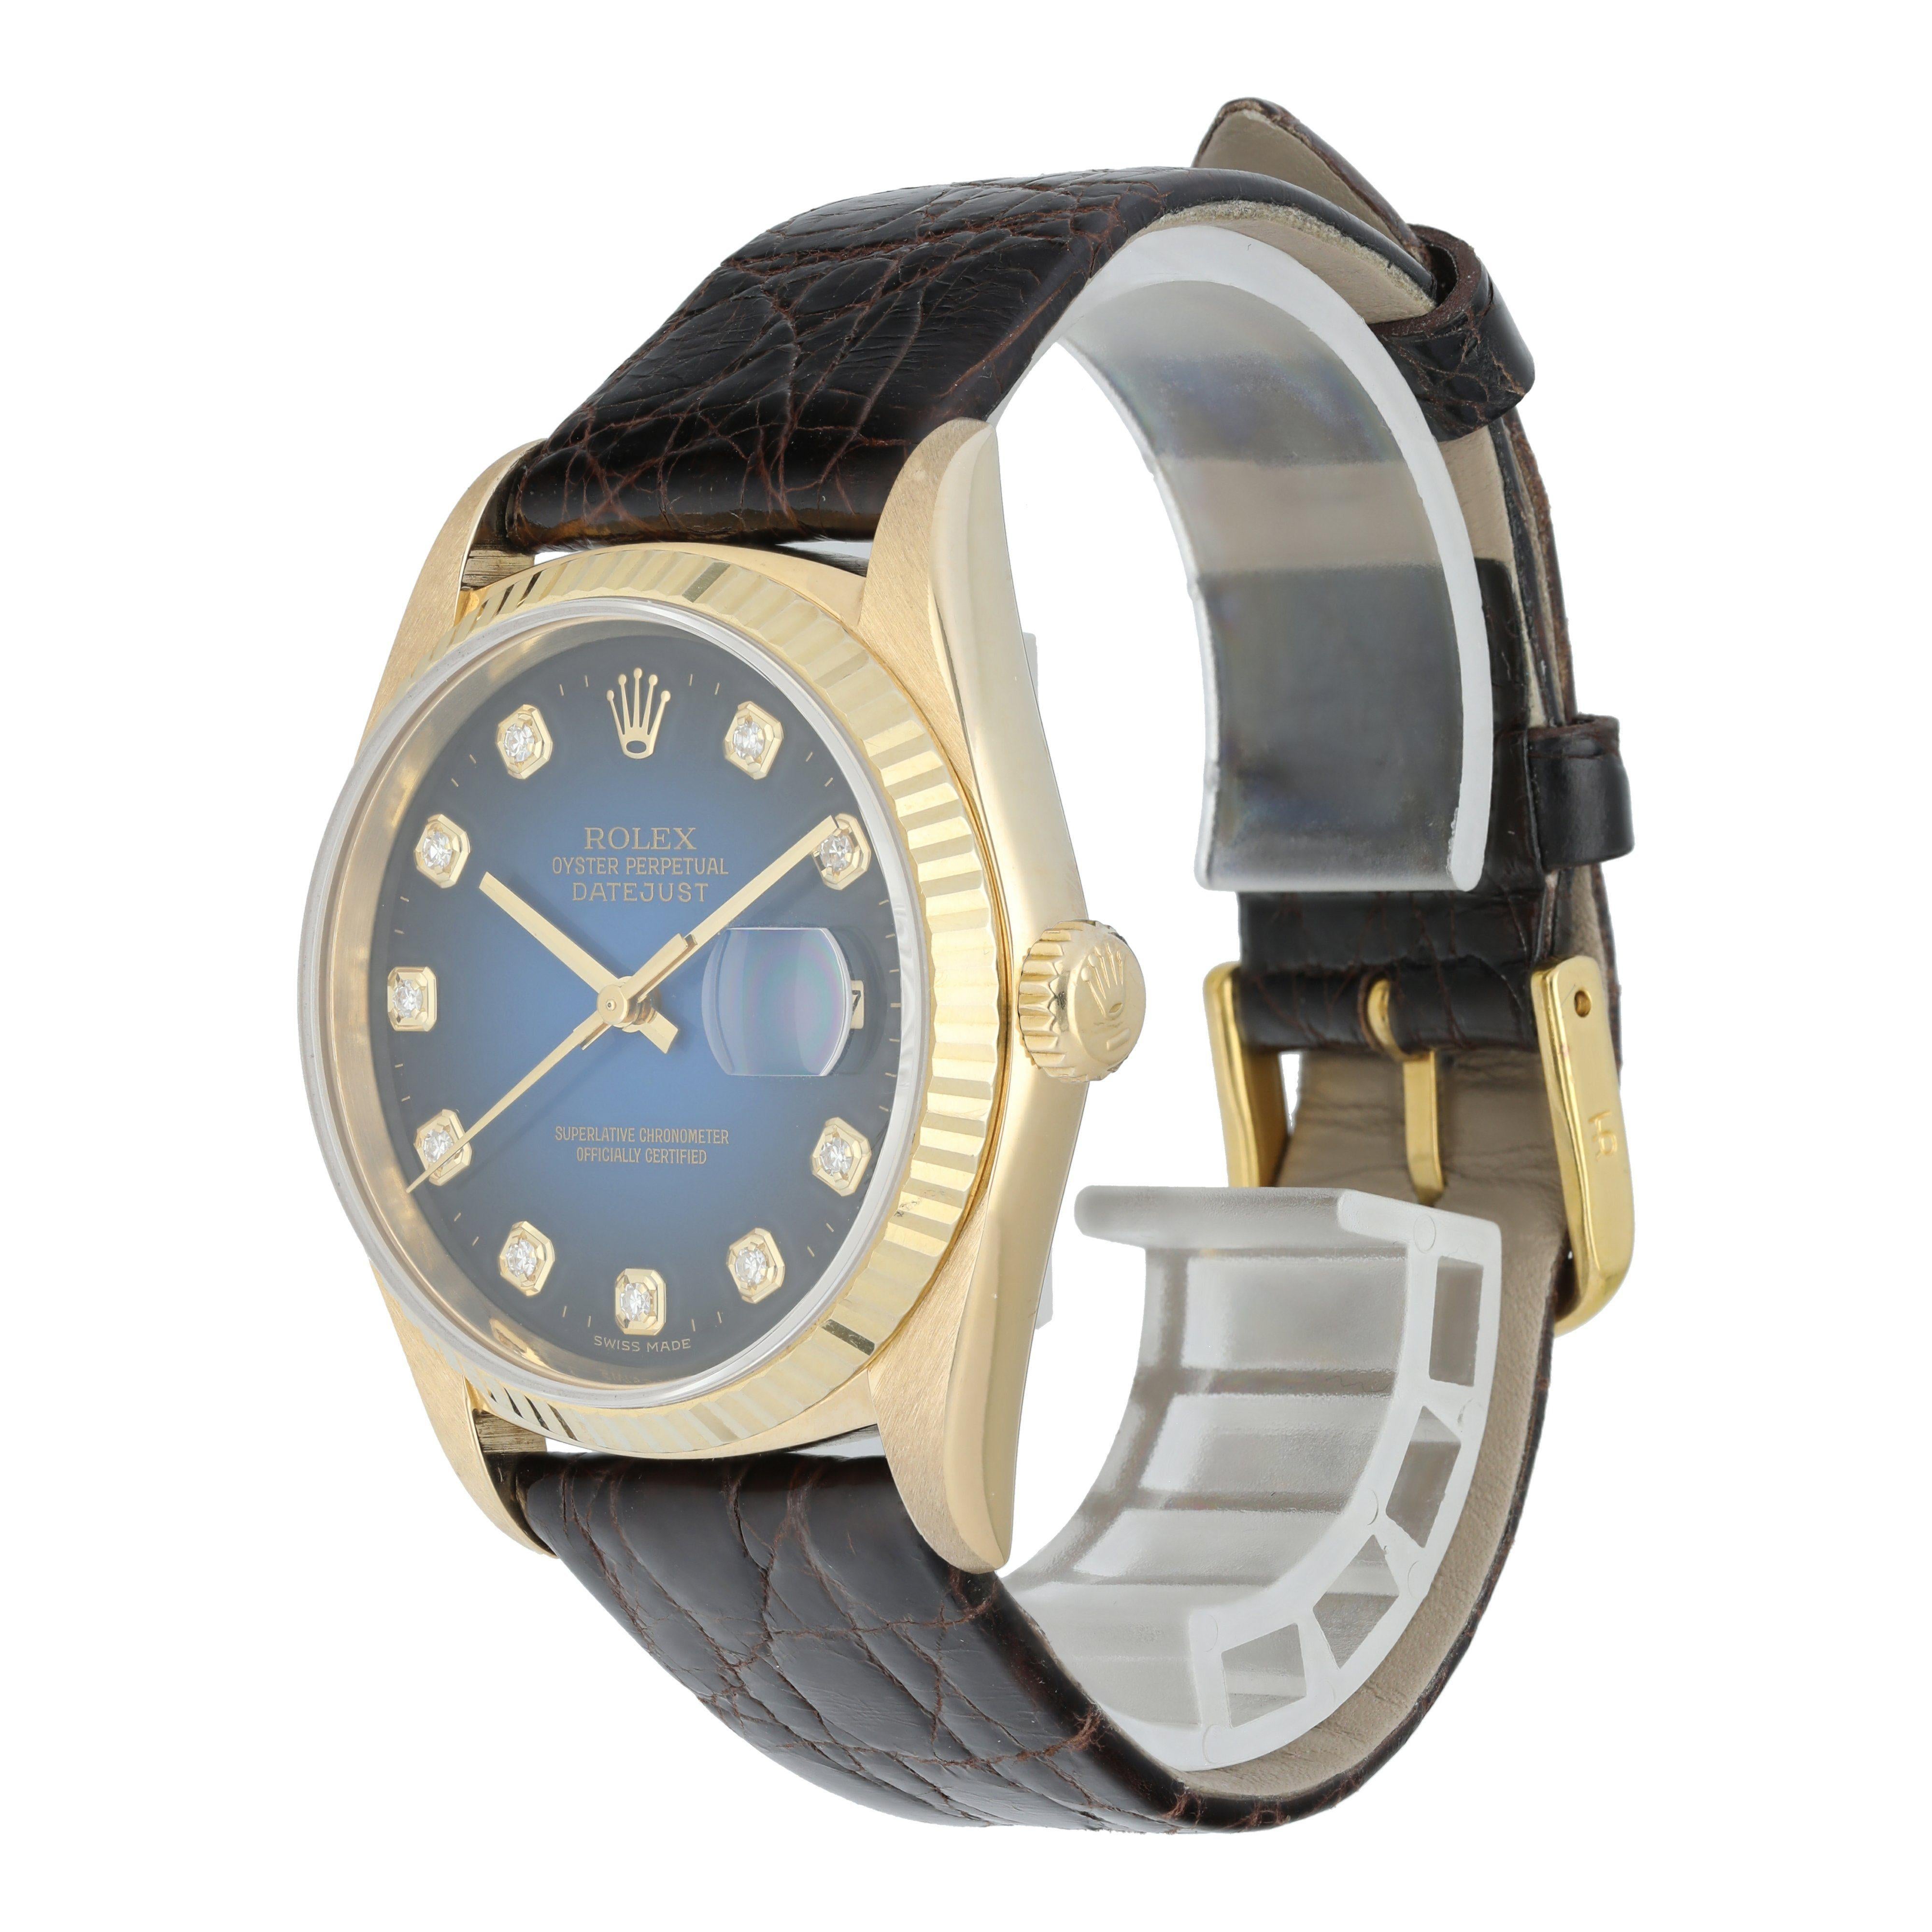 Rolex Datejust 16238 Men's Watch
36mm 18k Yellow gold case and fluted bezel. 
Yellow Gold fluted bezel. 
Factory Blue Vignette dial with diamond hour markers.
Minute markers on the outer dial.
Date display at the 3 o'clock position. 
Brown Leather